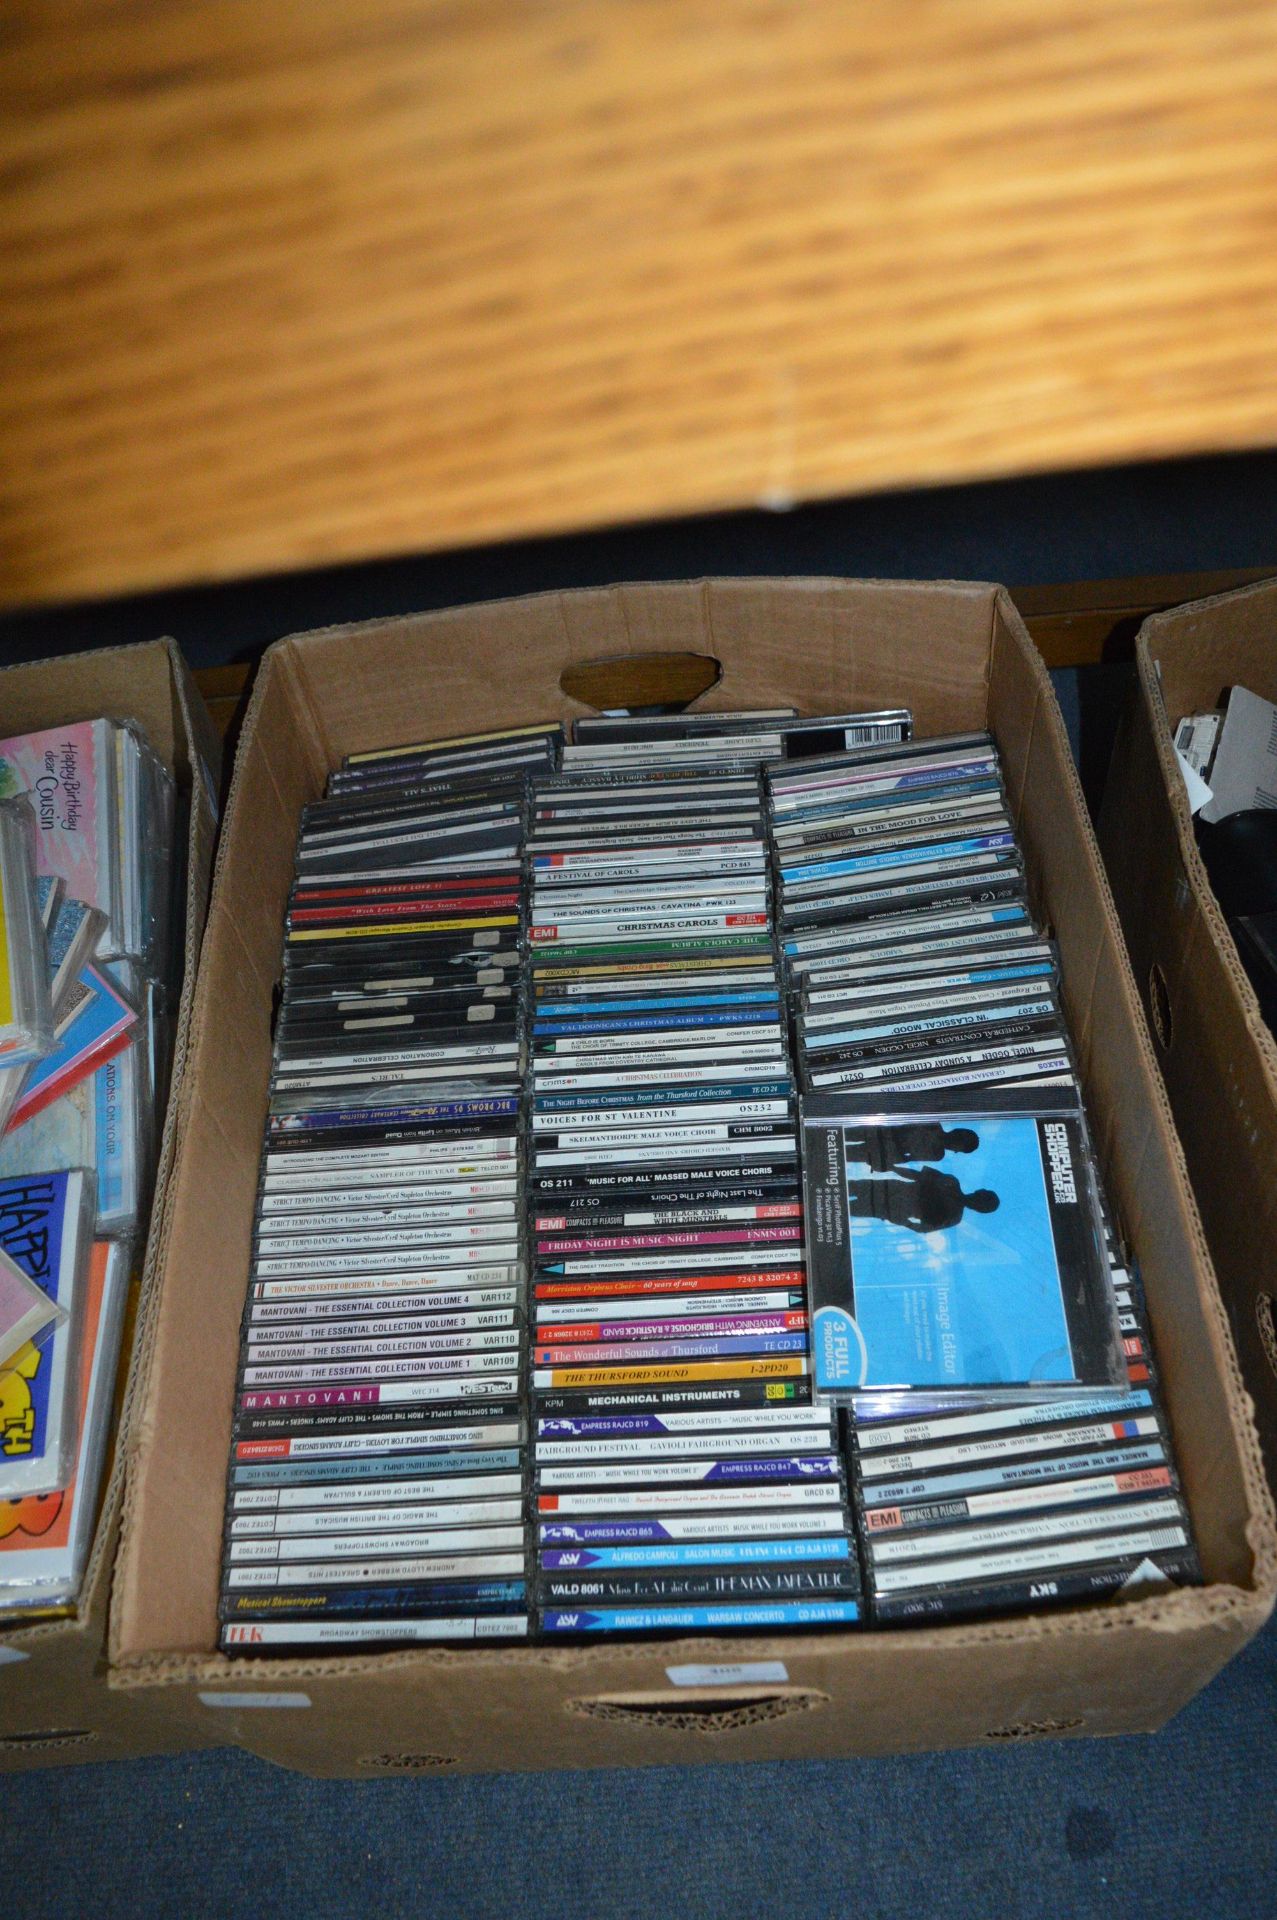 Box Containing a Large Quantity of CDs